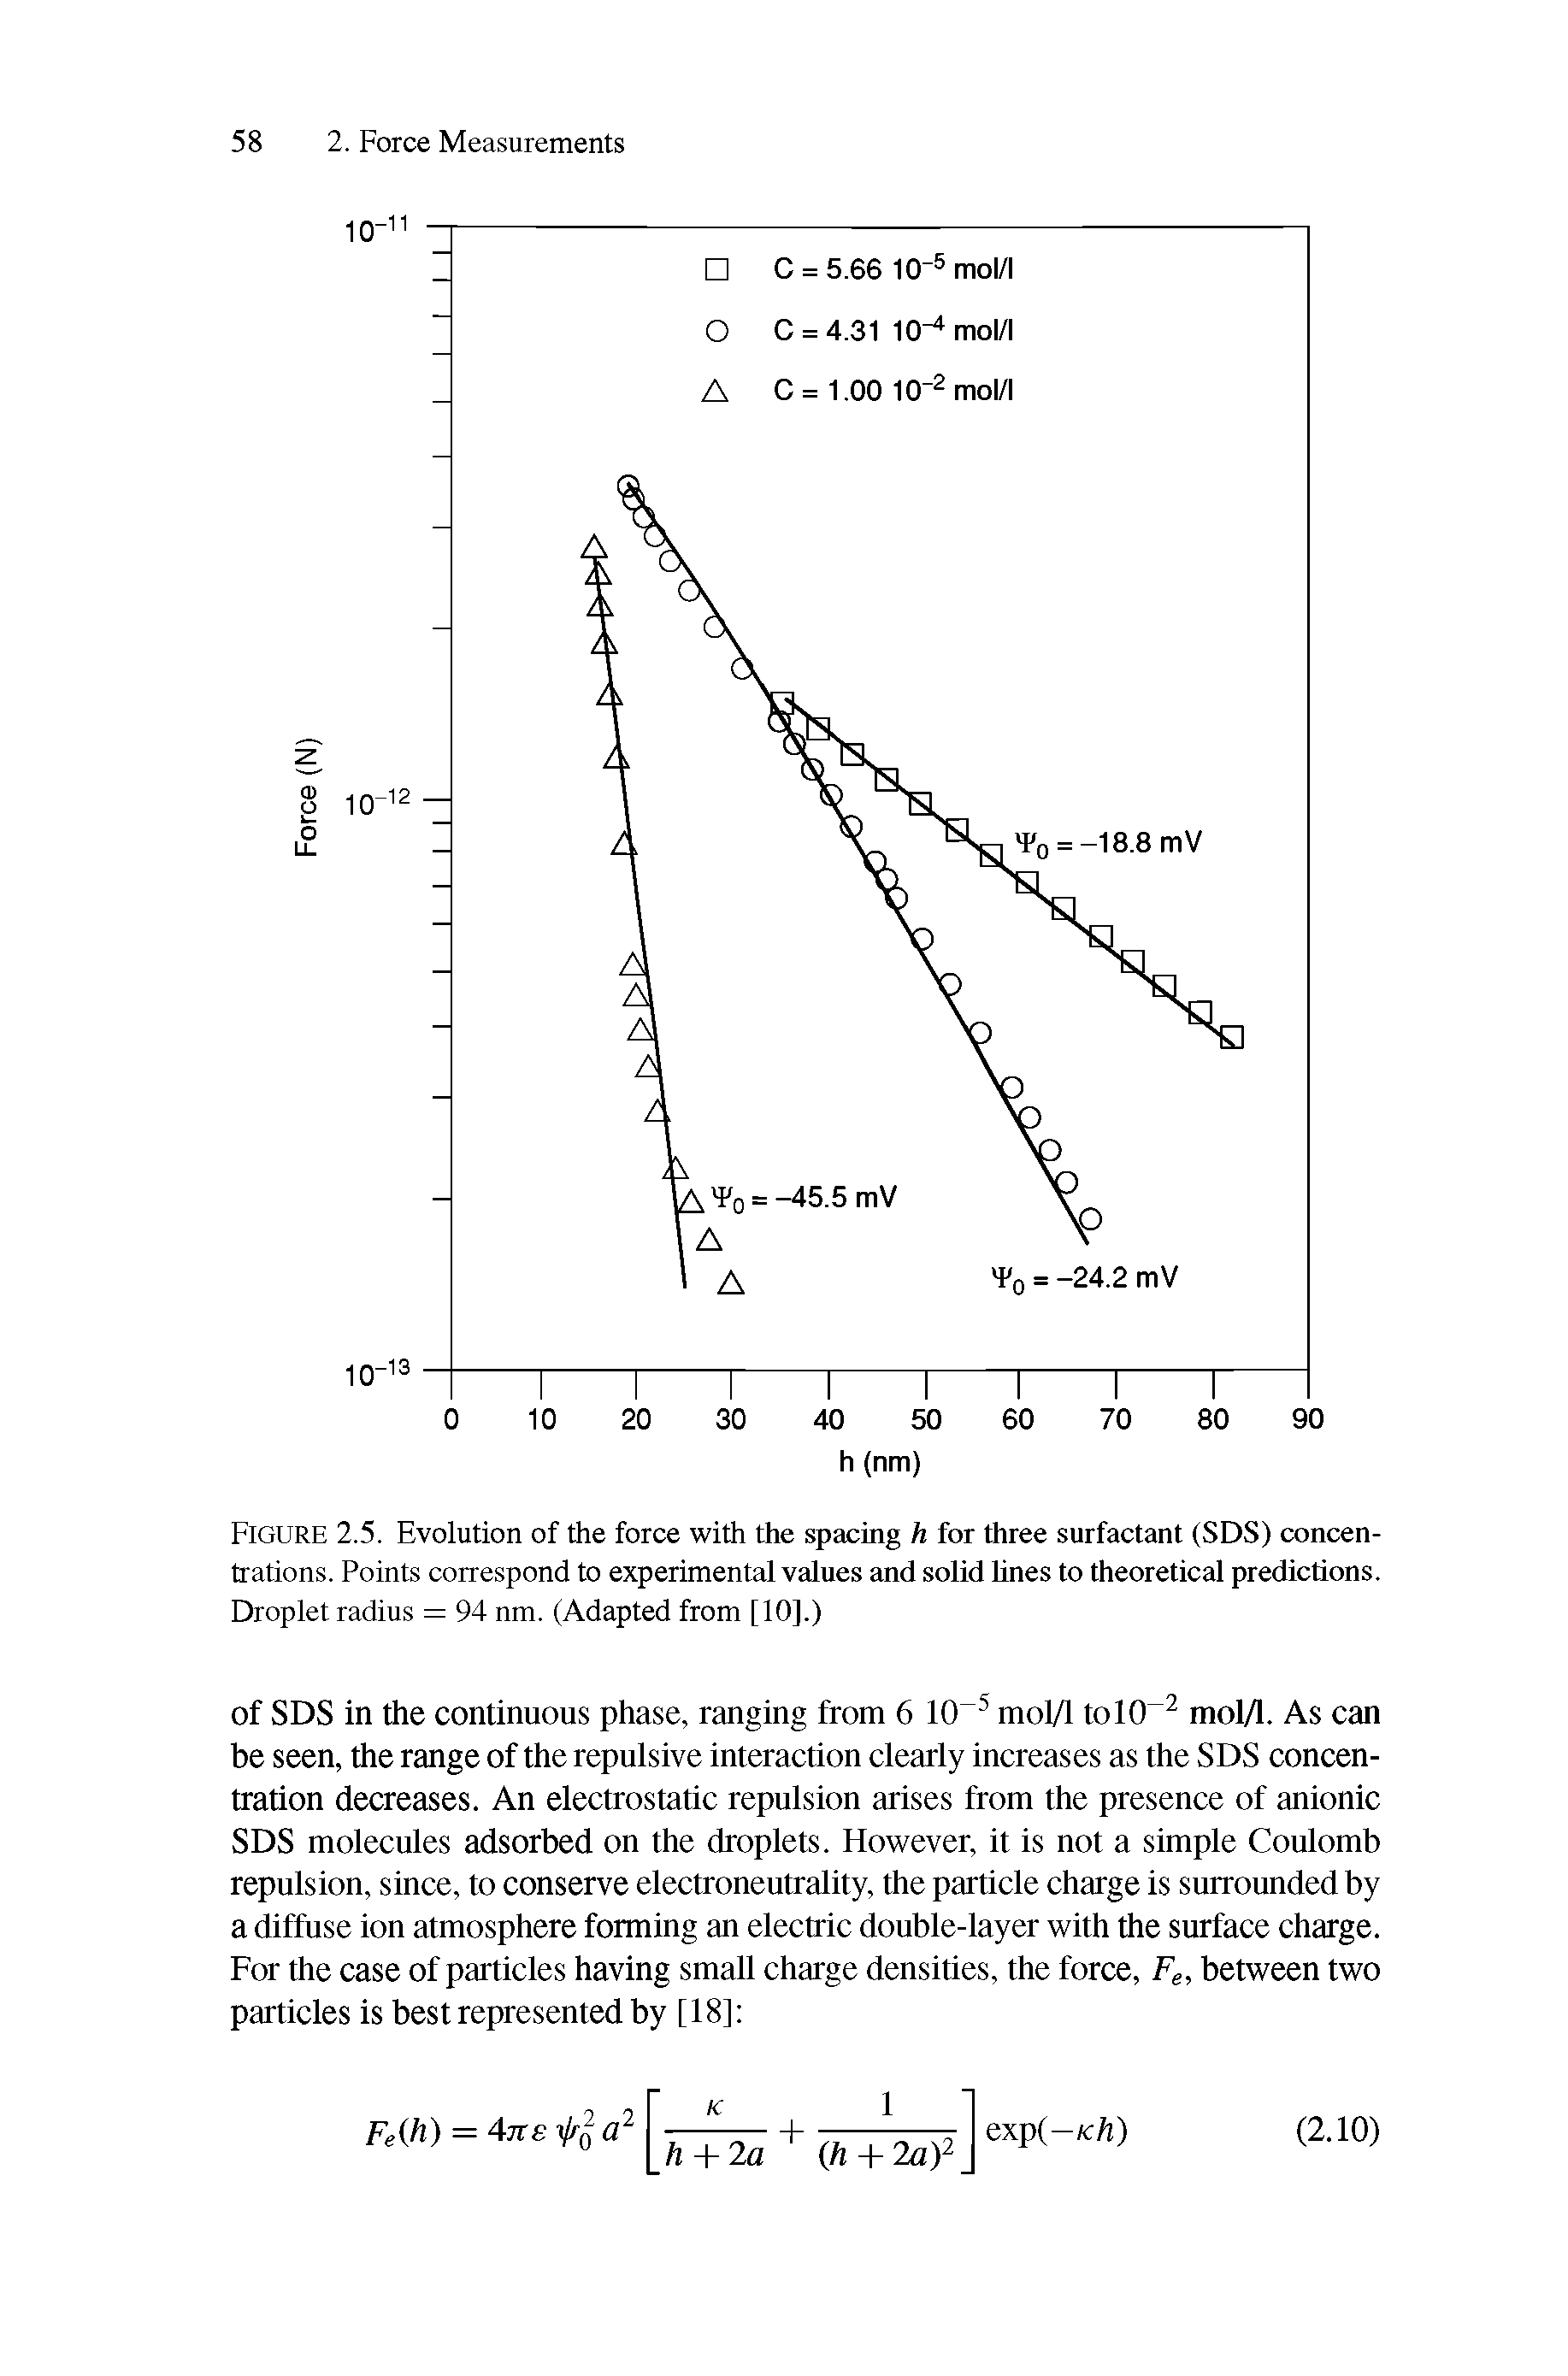 Figure 2.5. Evolution of the force with the spacing h for three surfactant (SDS) concentrations. Points correspond to experimental values and solid lines to theoretical predictions. Droplet radius = 94 nm. (Adapted from [10].)...